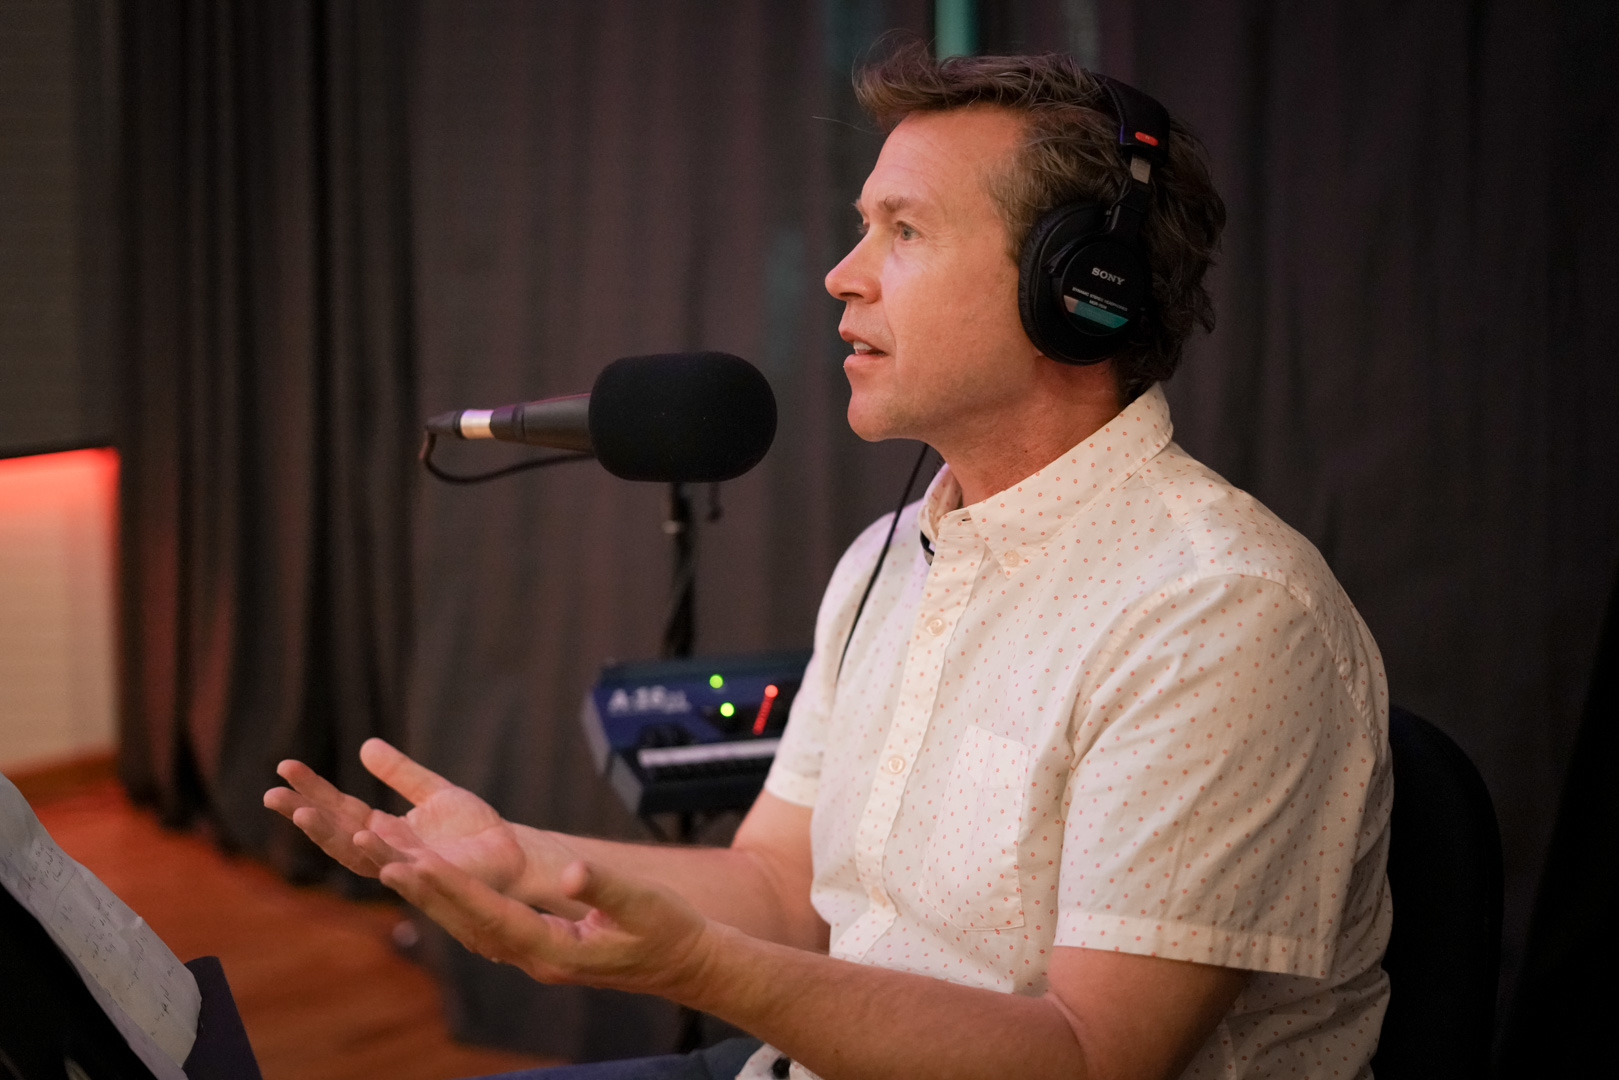 A man sits in front of a microphone while speaking